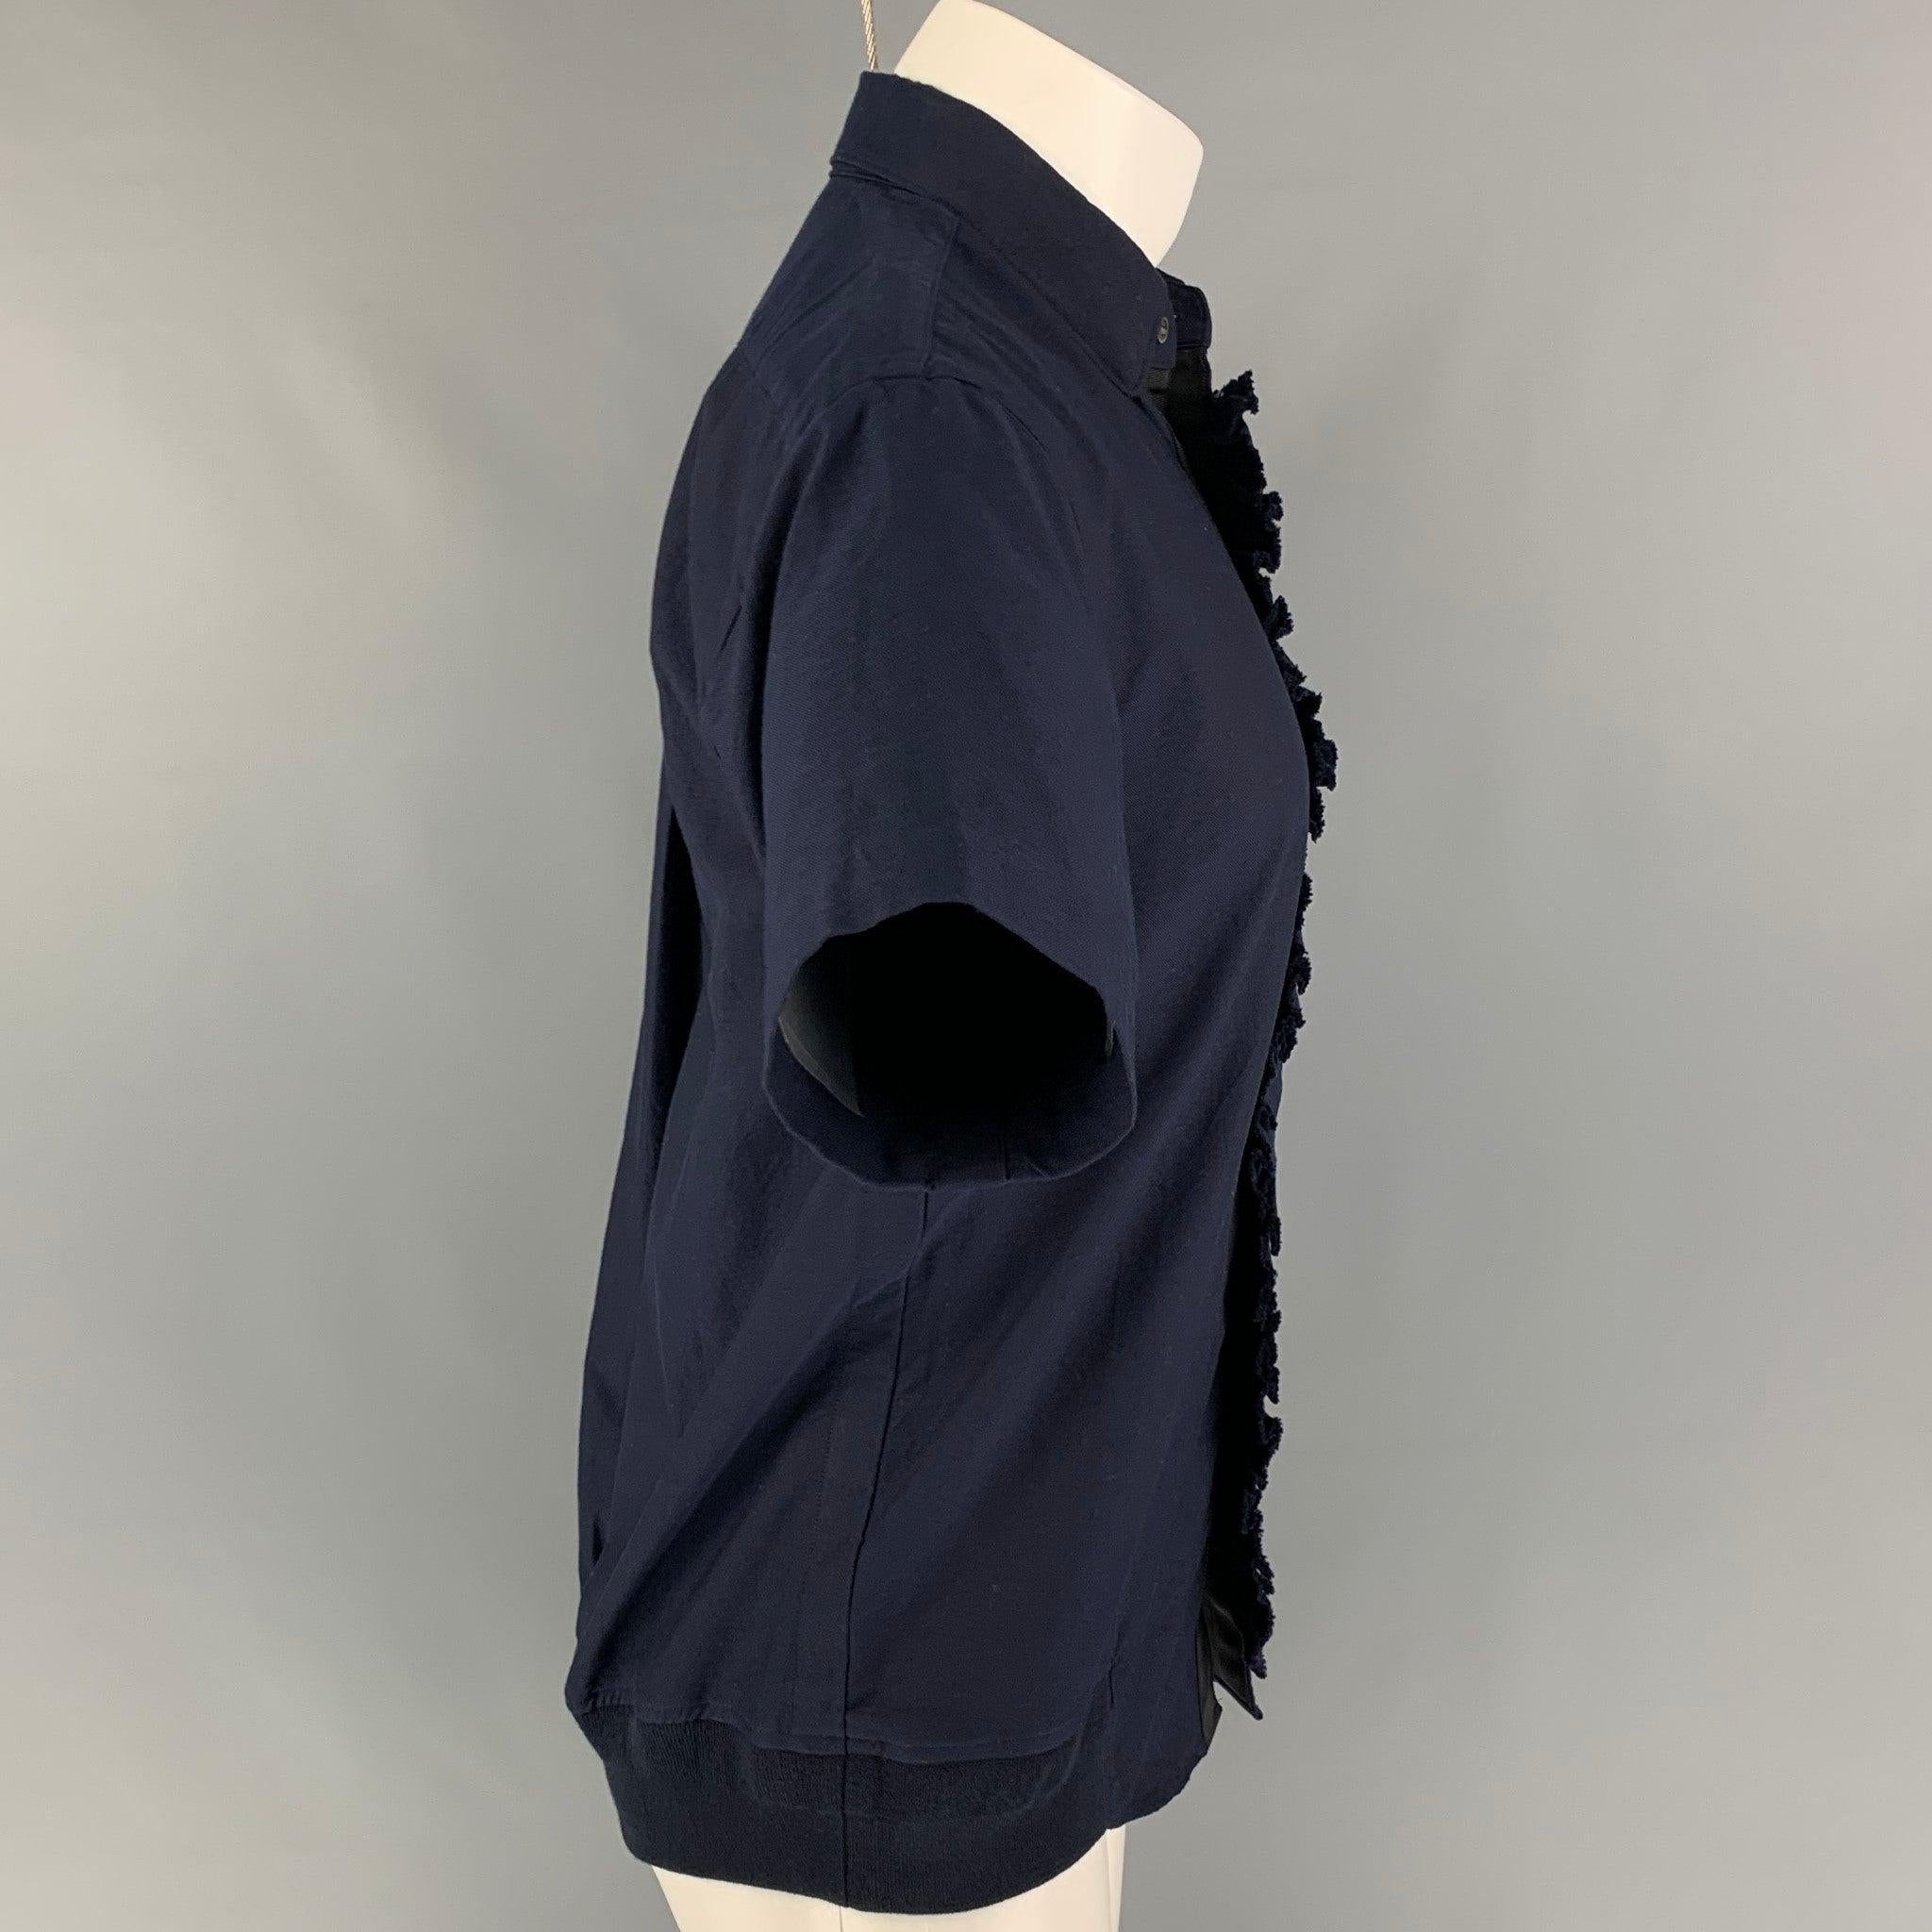 SACAI short sleeve shirt comes in a navy cotton featuring a ruffled trim, elastic hem, patch pocket, spread collar, and a button up closure.
Very Good
Pre-Owned Condition. 

Marked:   1 

Measurements: 
 
Shoulder: 17 inches  Chest: 38 inches 